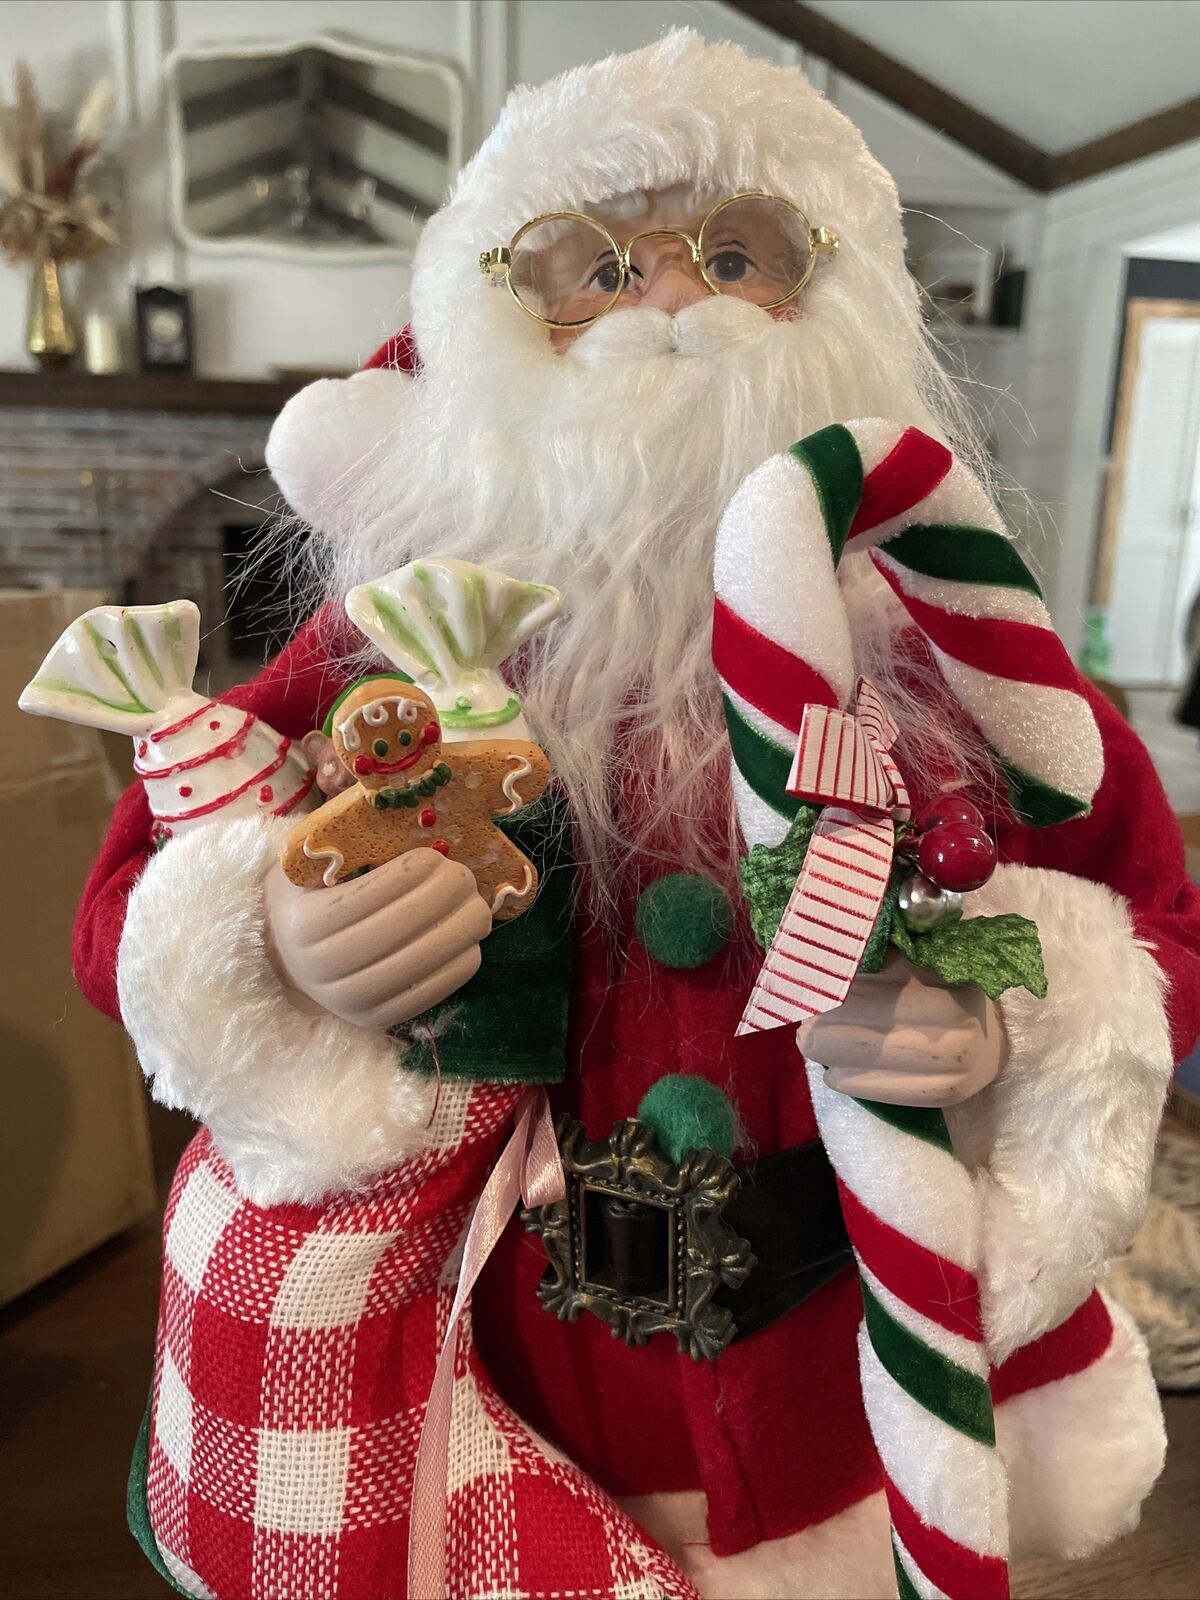 Beautiful Life-Like 18” Tall Santa Claus With Candy Cane And Gingerbread Man